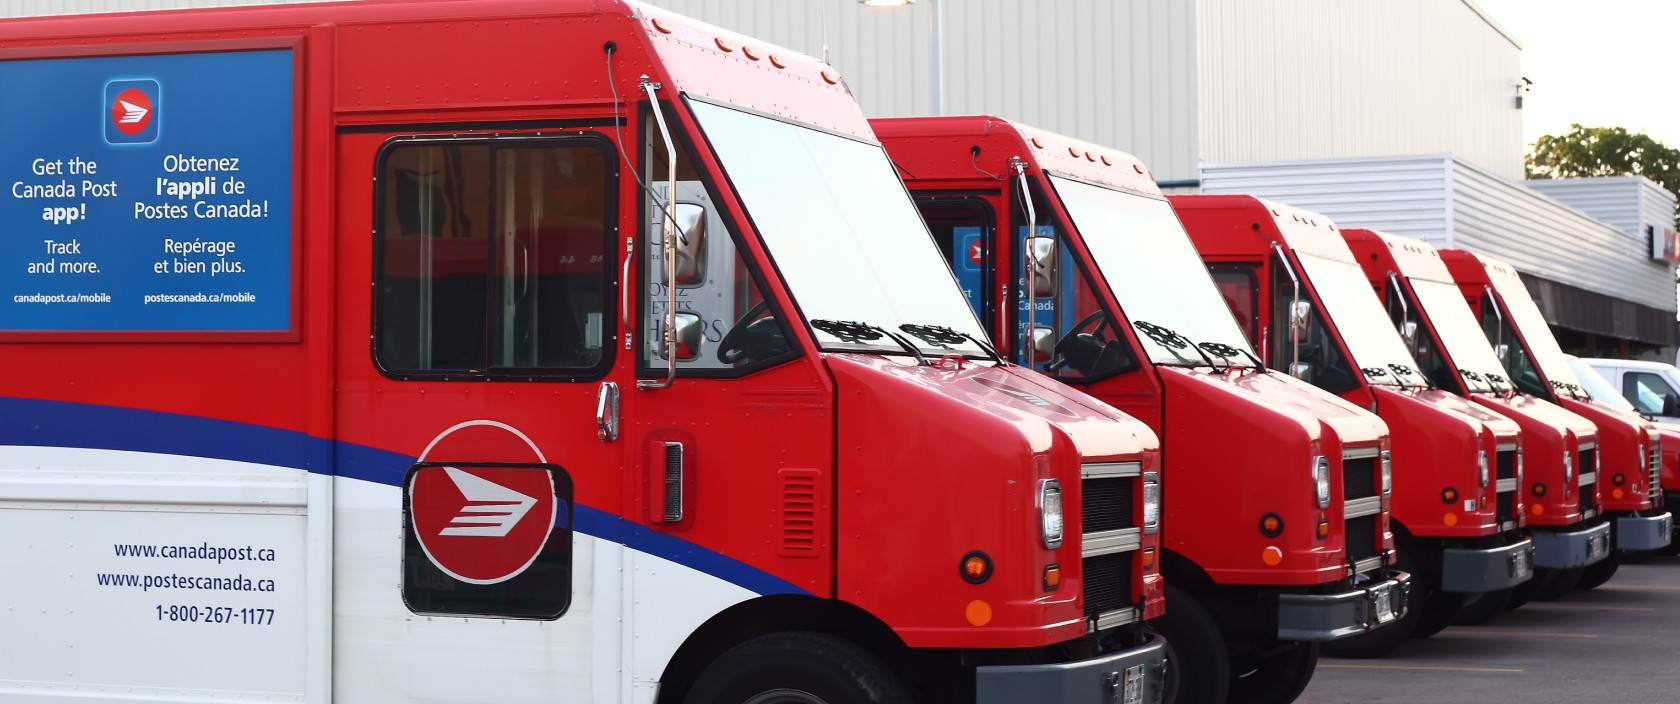 Canada Post delivery trucks parked in a row.